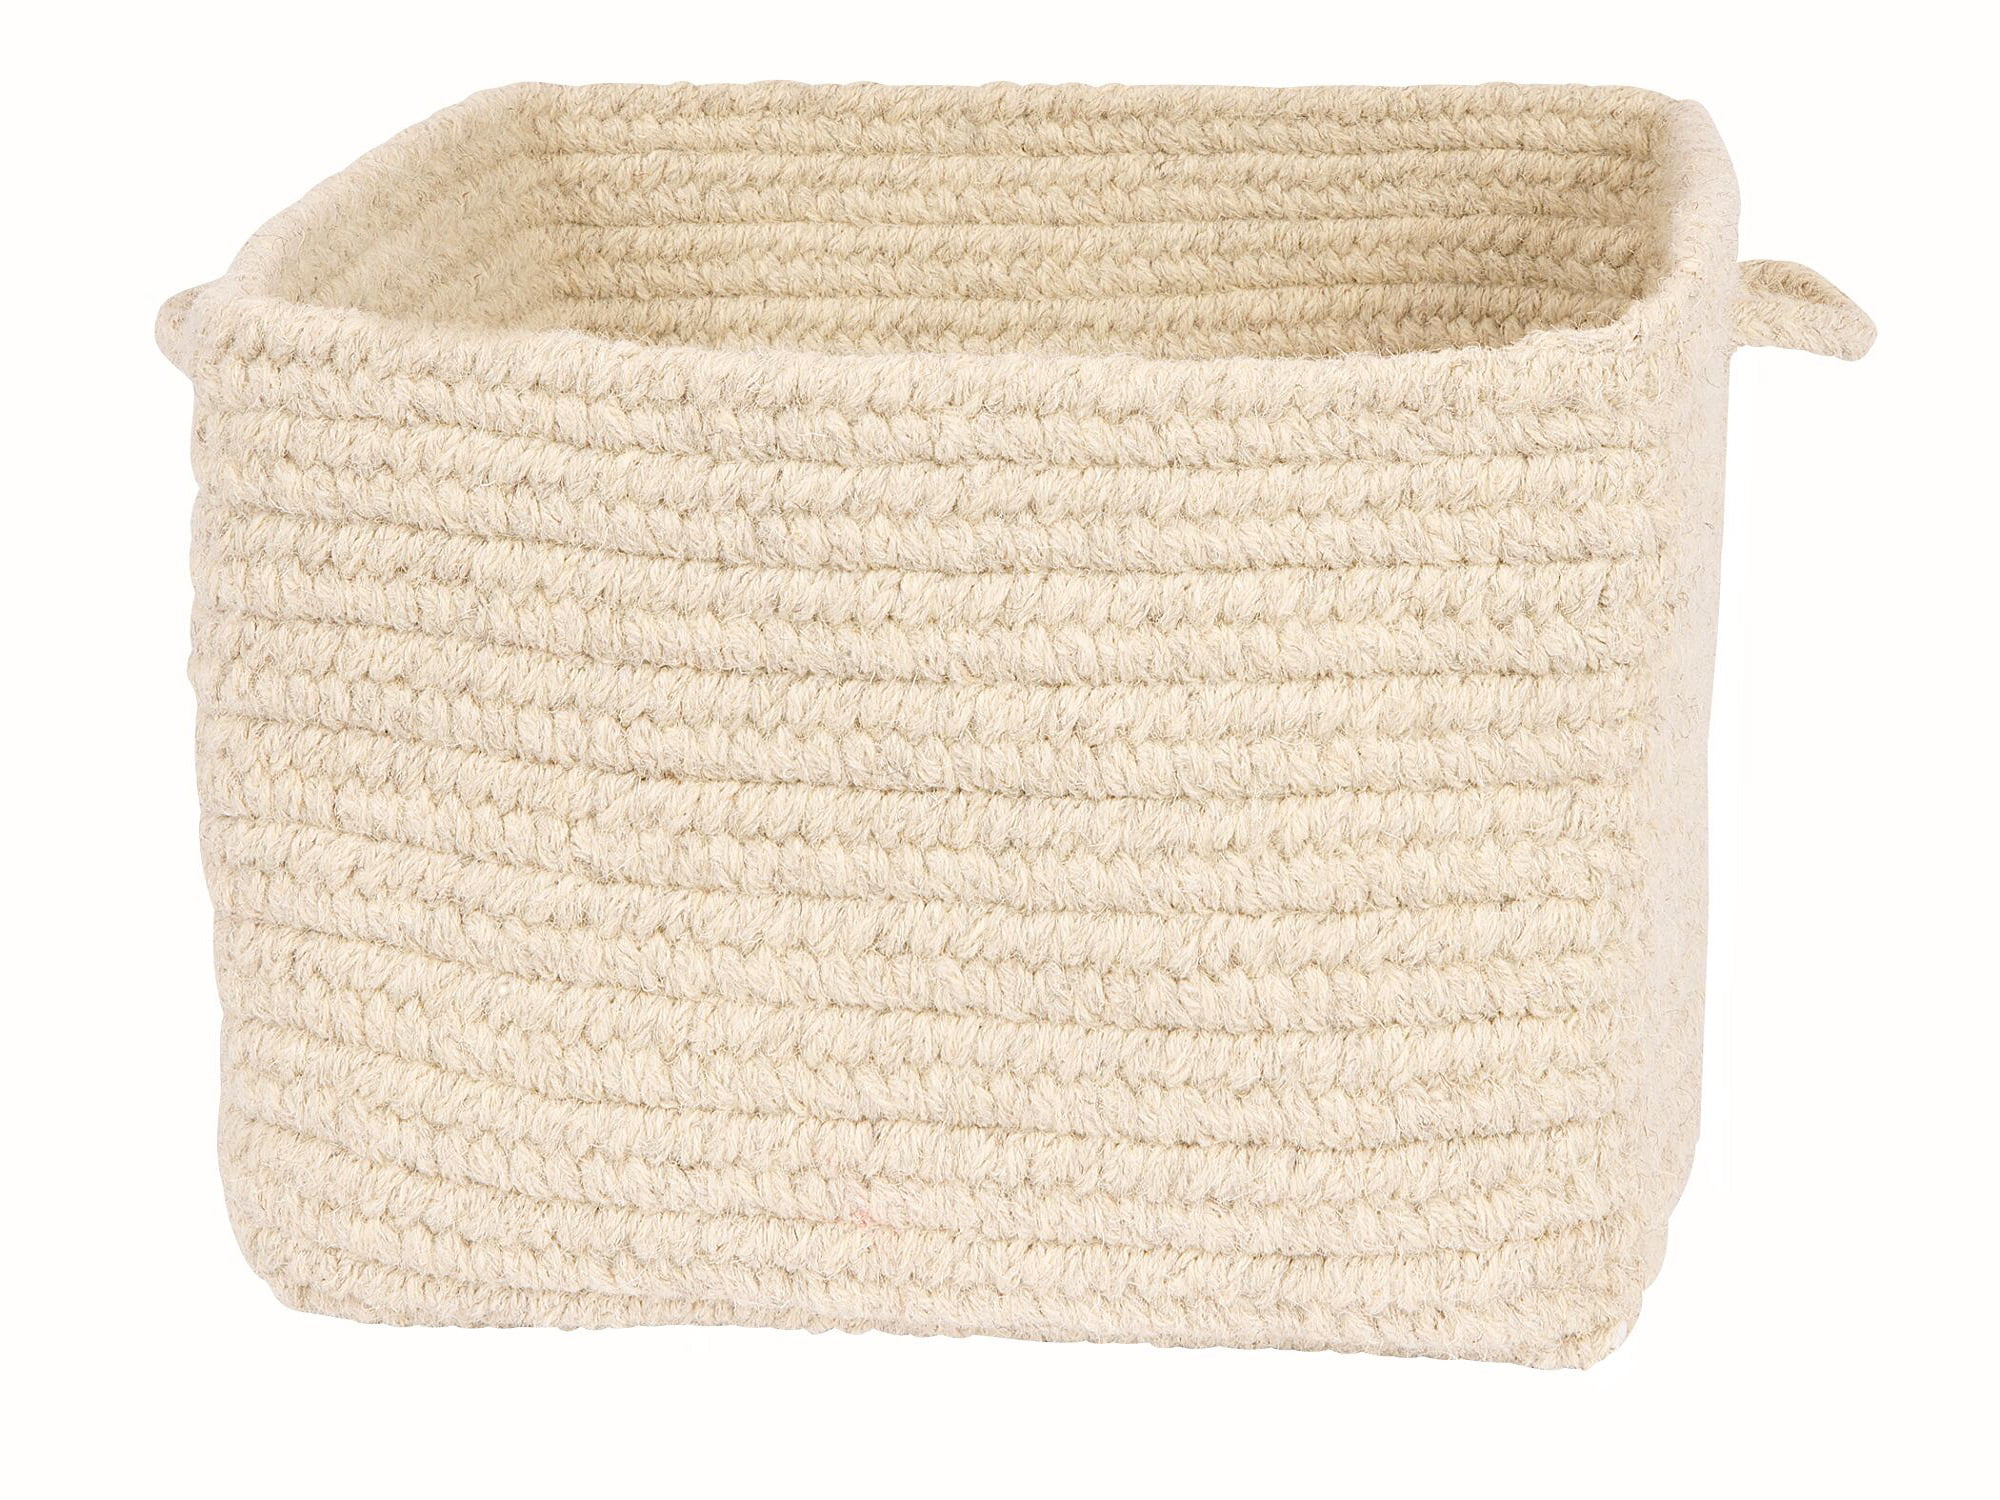 18 X 18 X 12 In. Chunky Natural Wool Natural Storage Basket